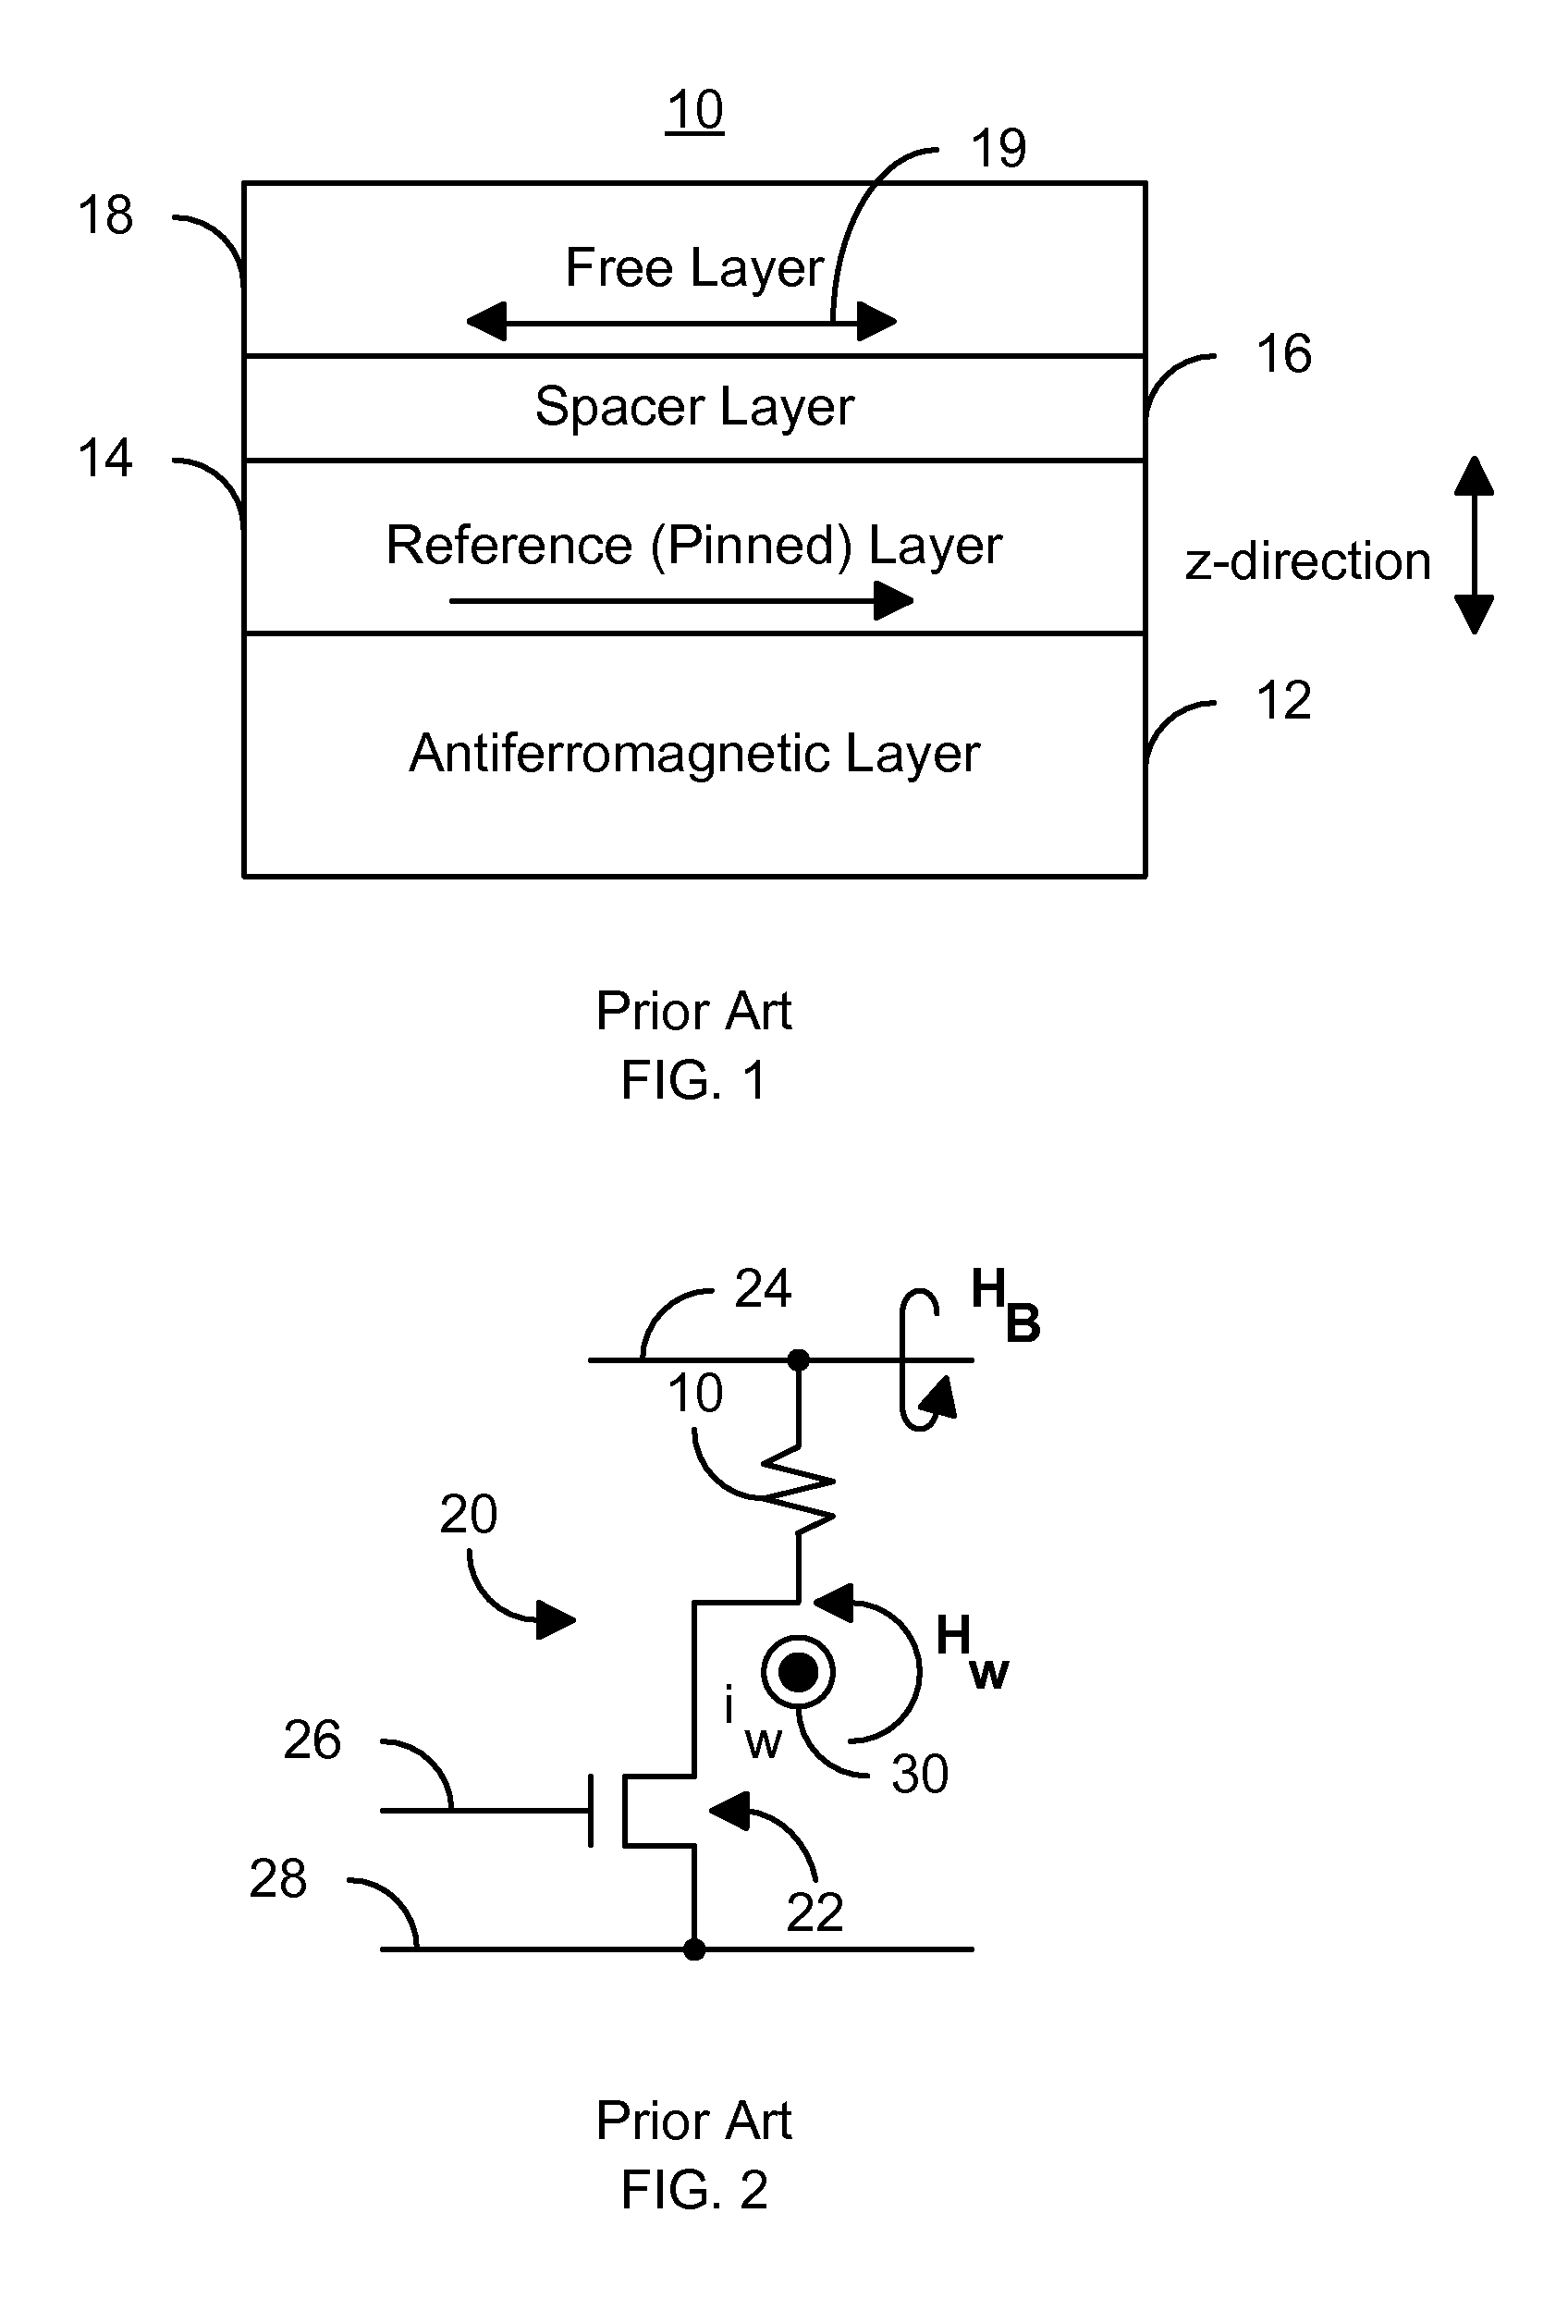 Method and system for using a pulsed field to assist spin transfer induced switching of magnetic memory elements